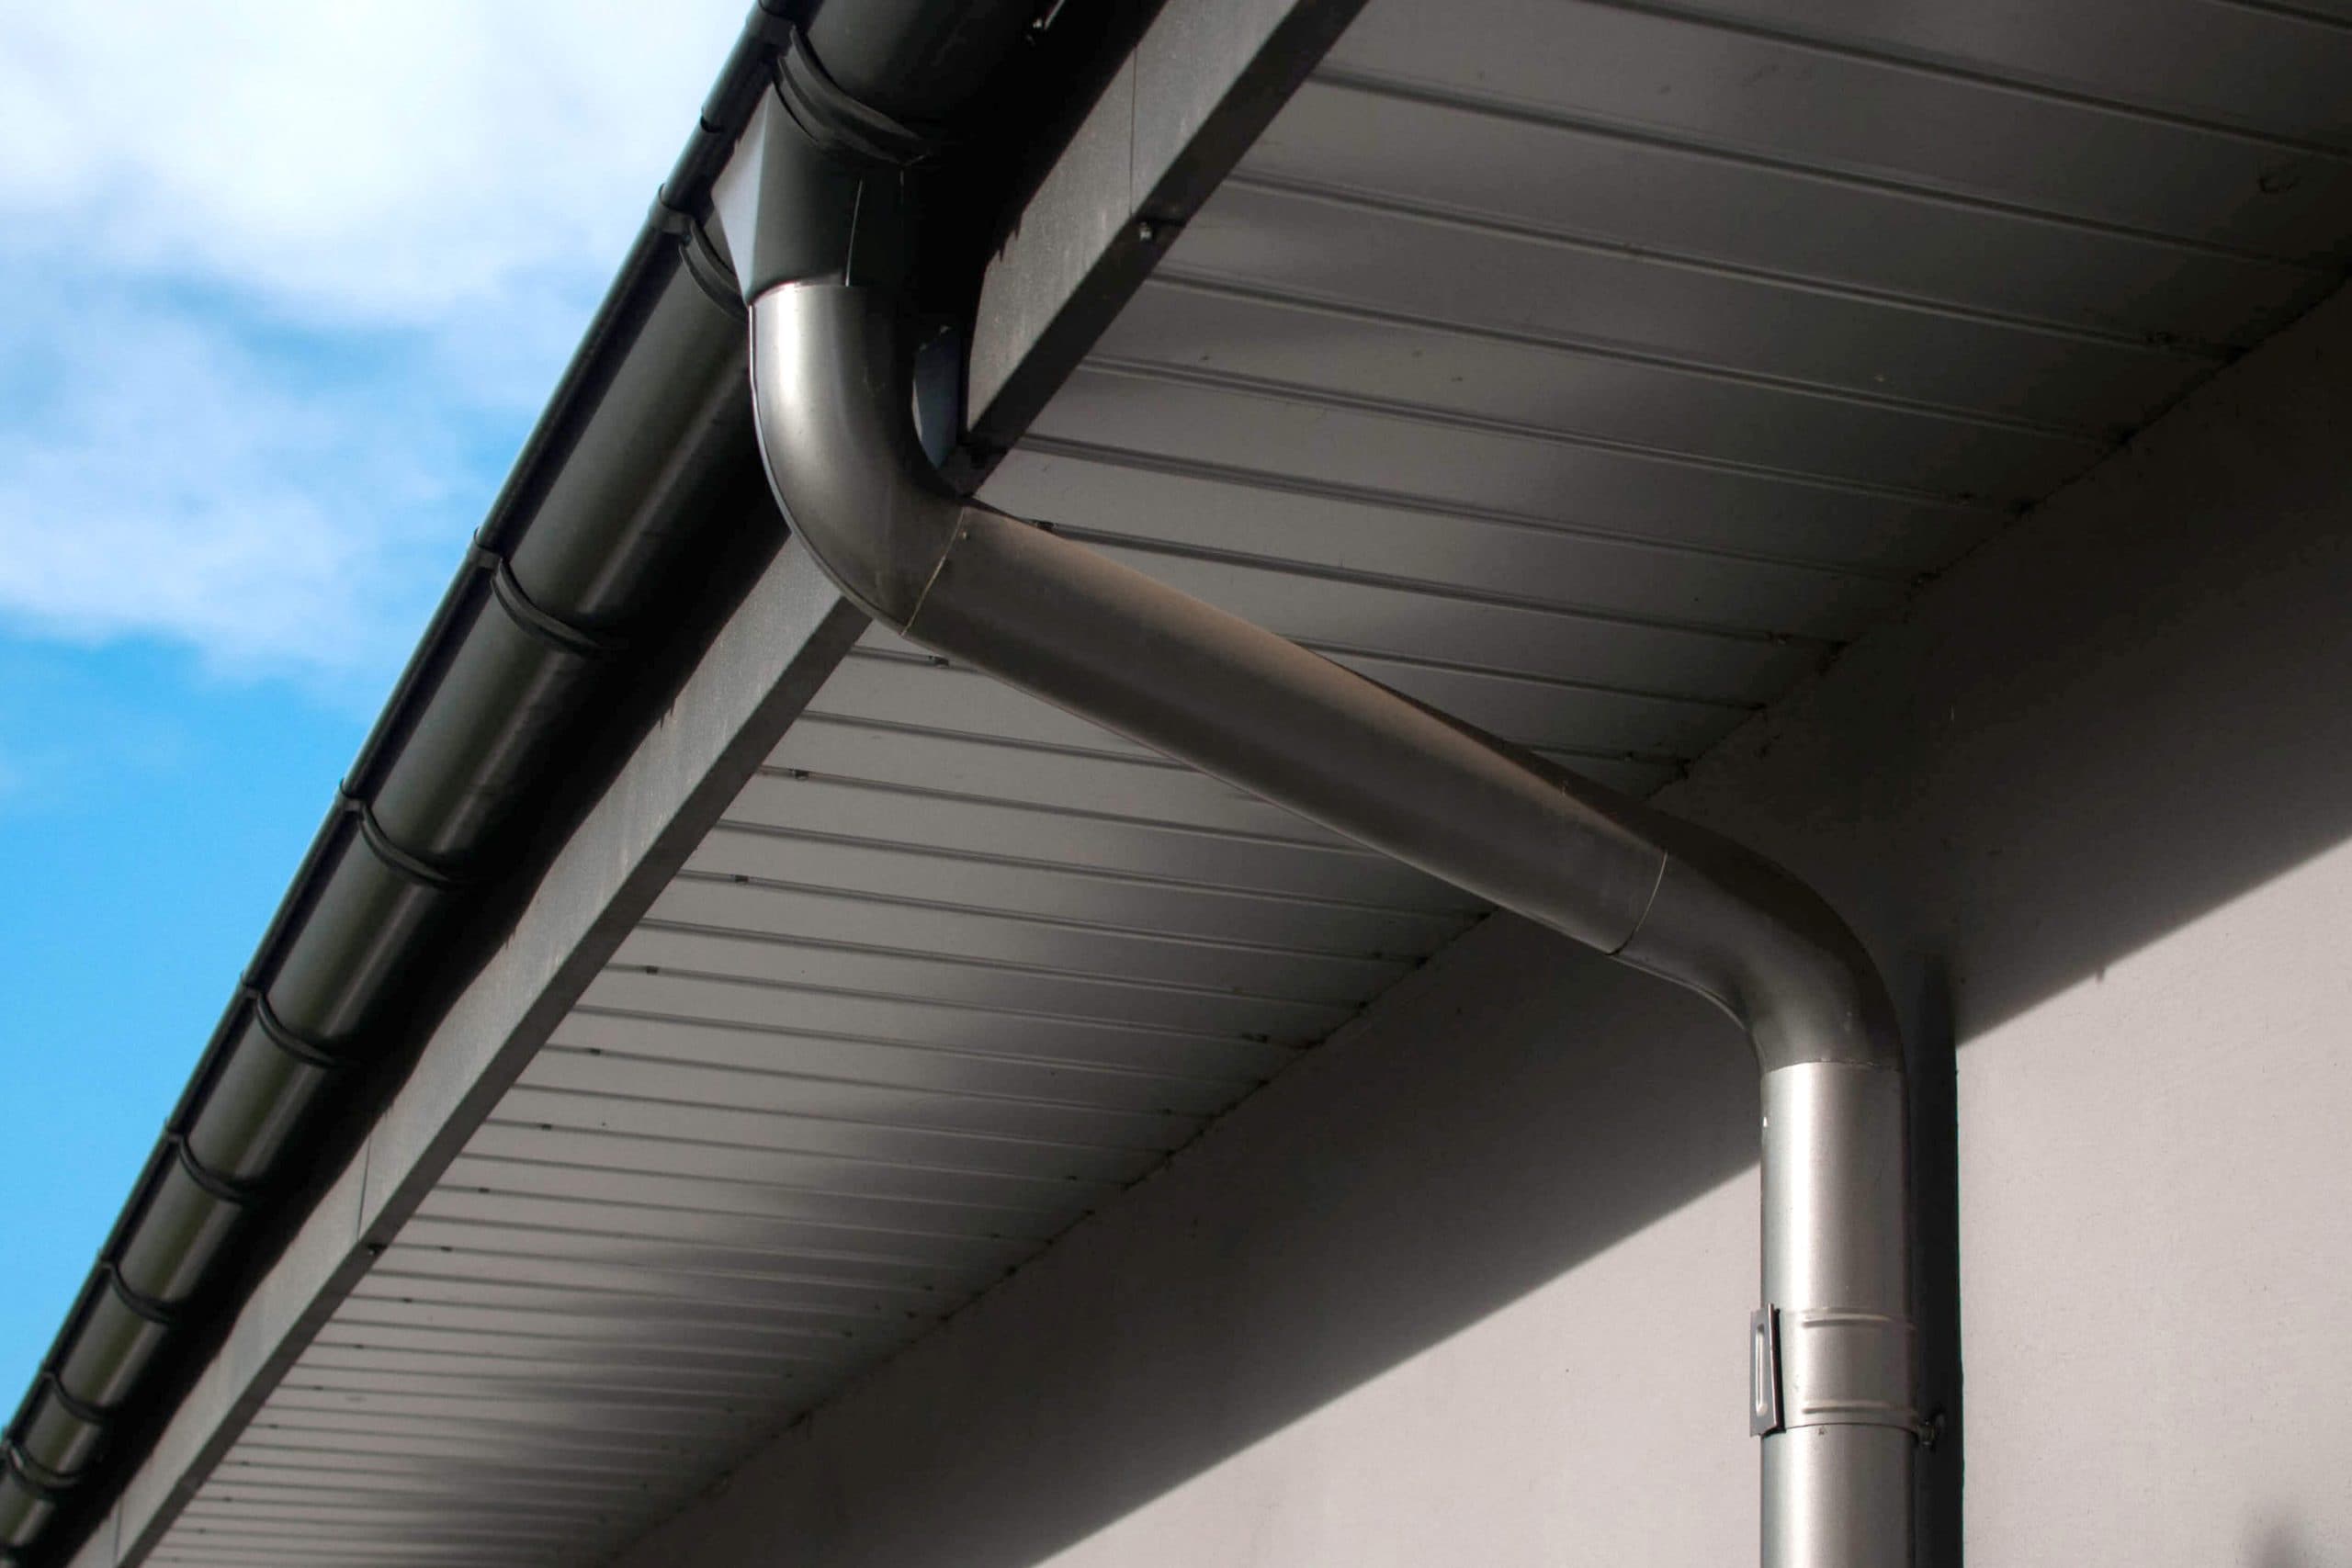 Reliable and affordable Galvanized gutters installation in Oklahoma City